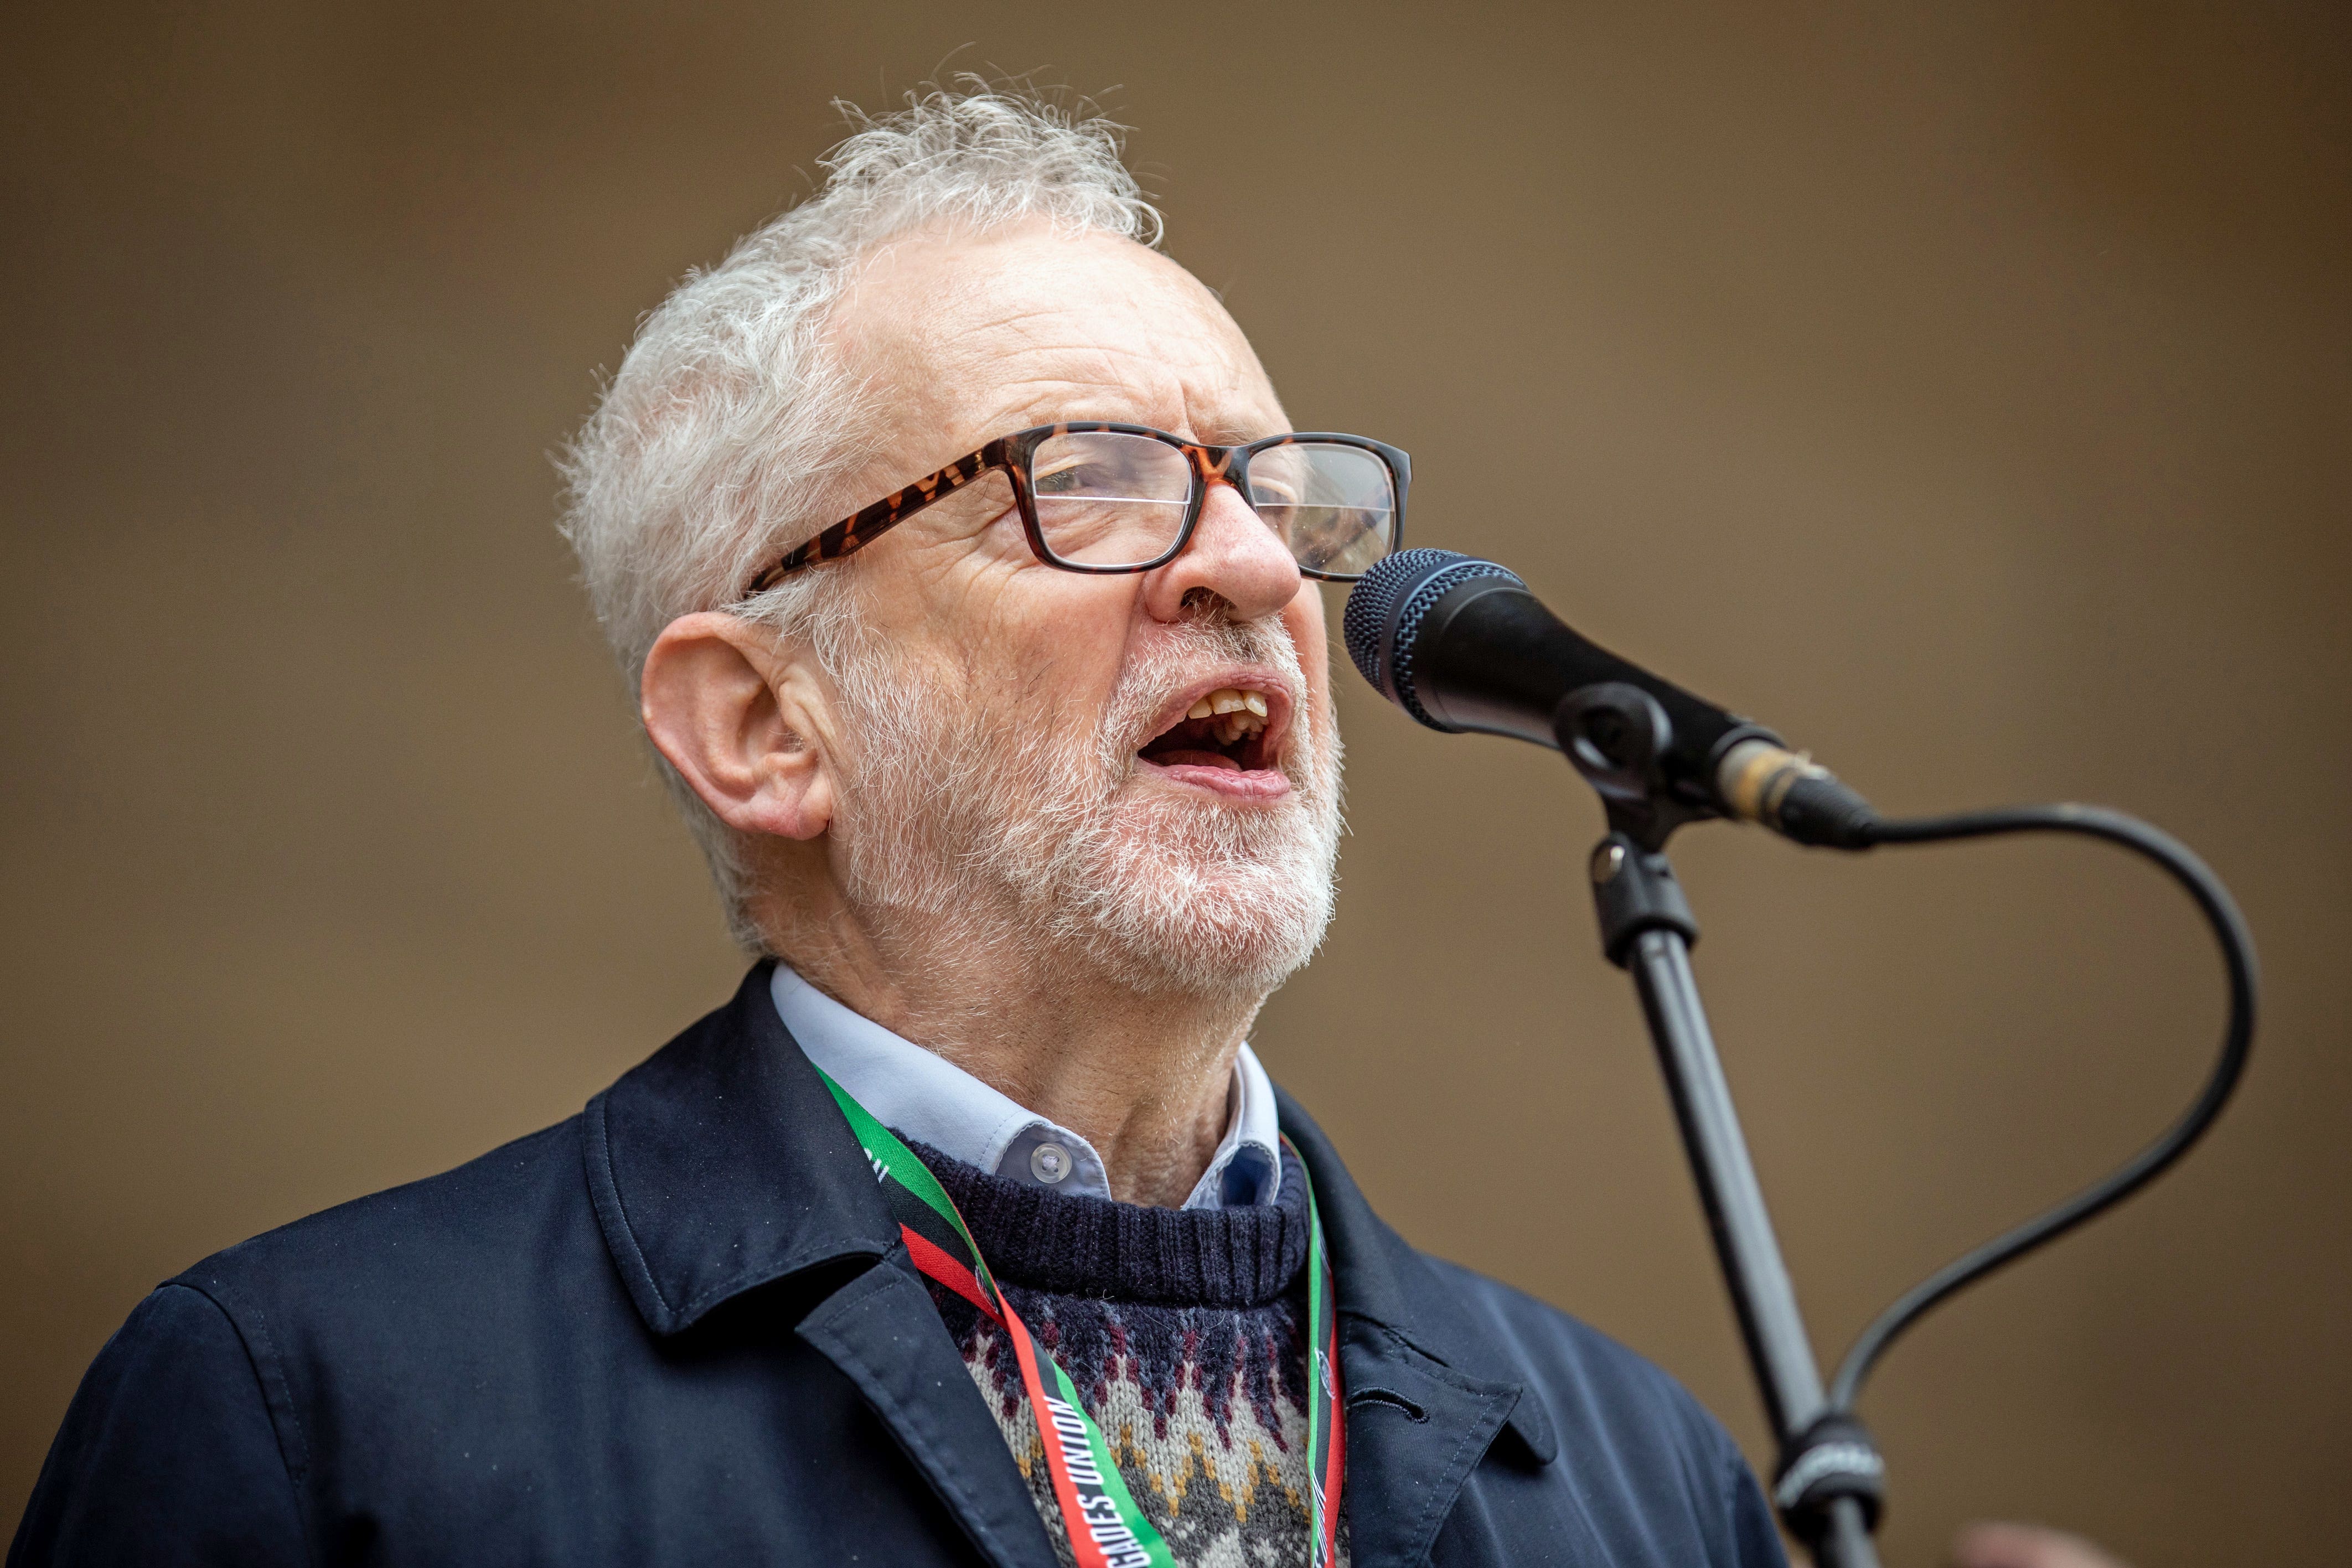 Time is running out for Jeremy Corbyn to build momentum as an independent MP